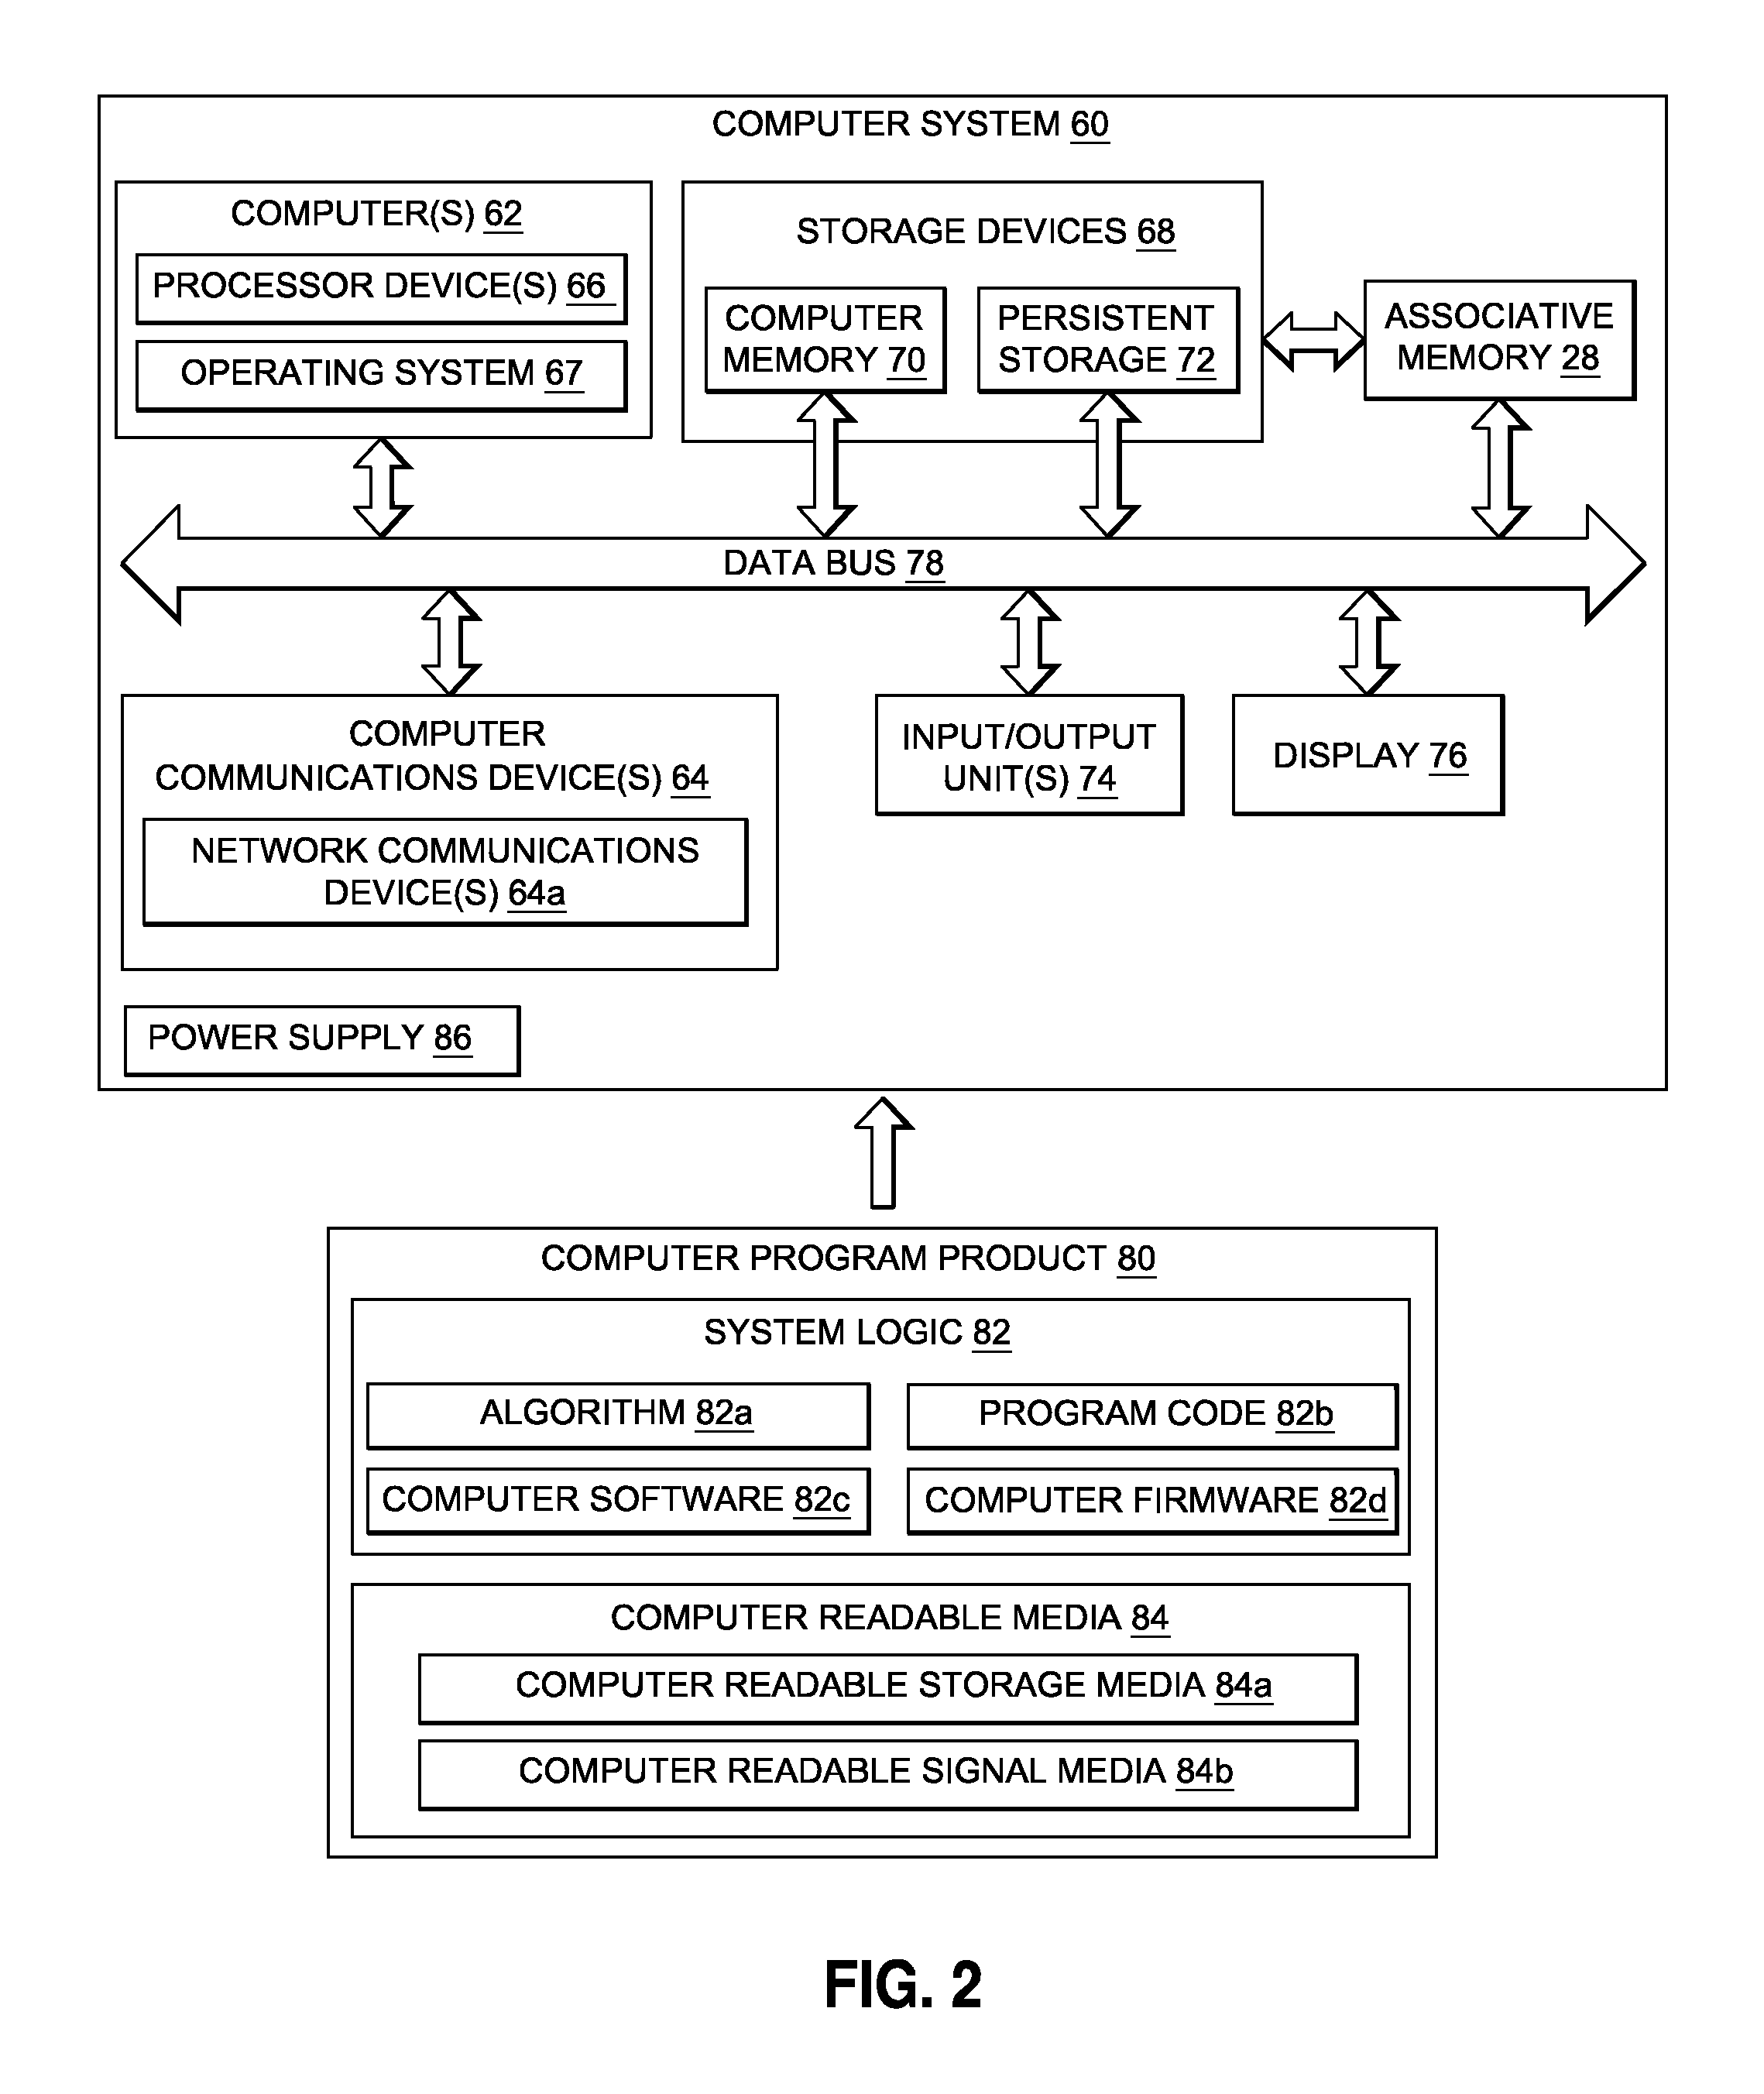 Data driven classification and troubleshooting system and method